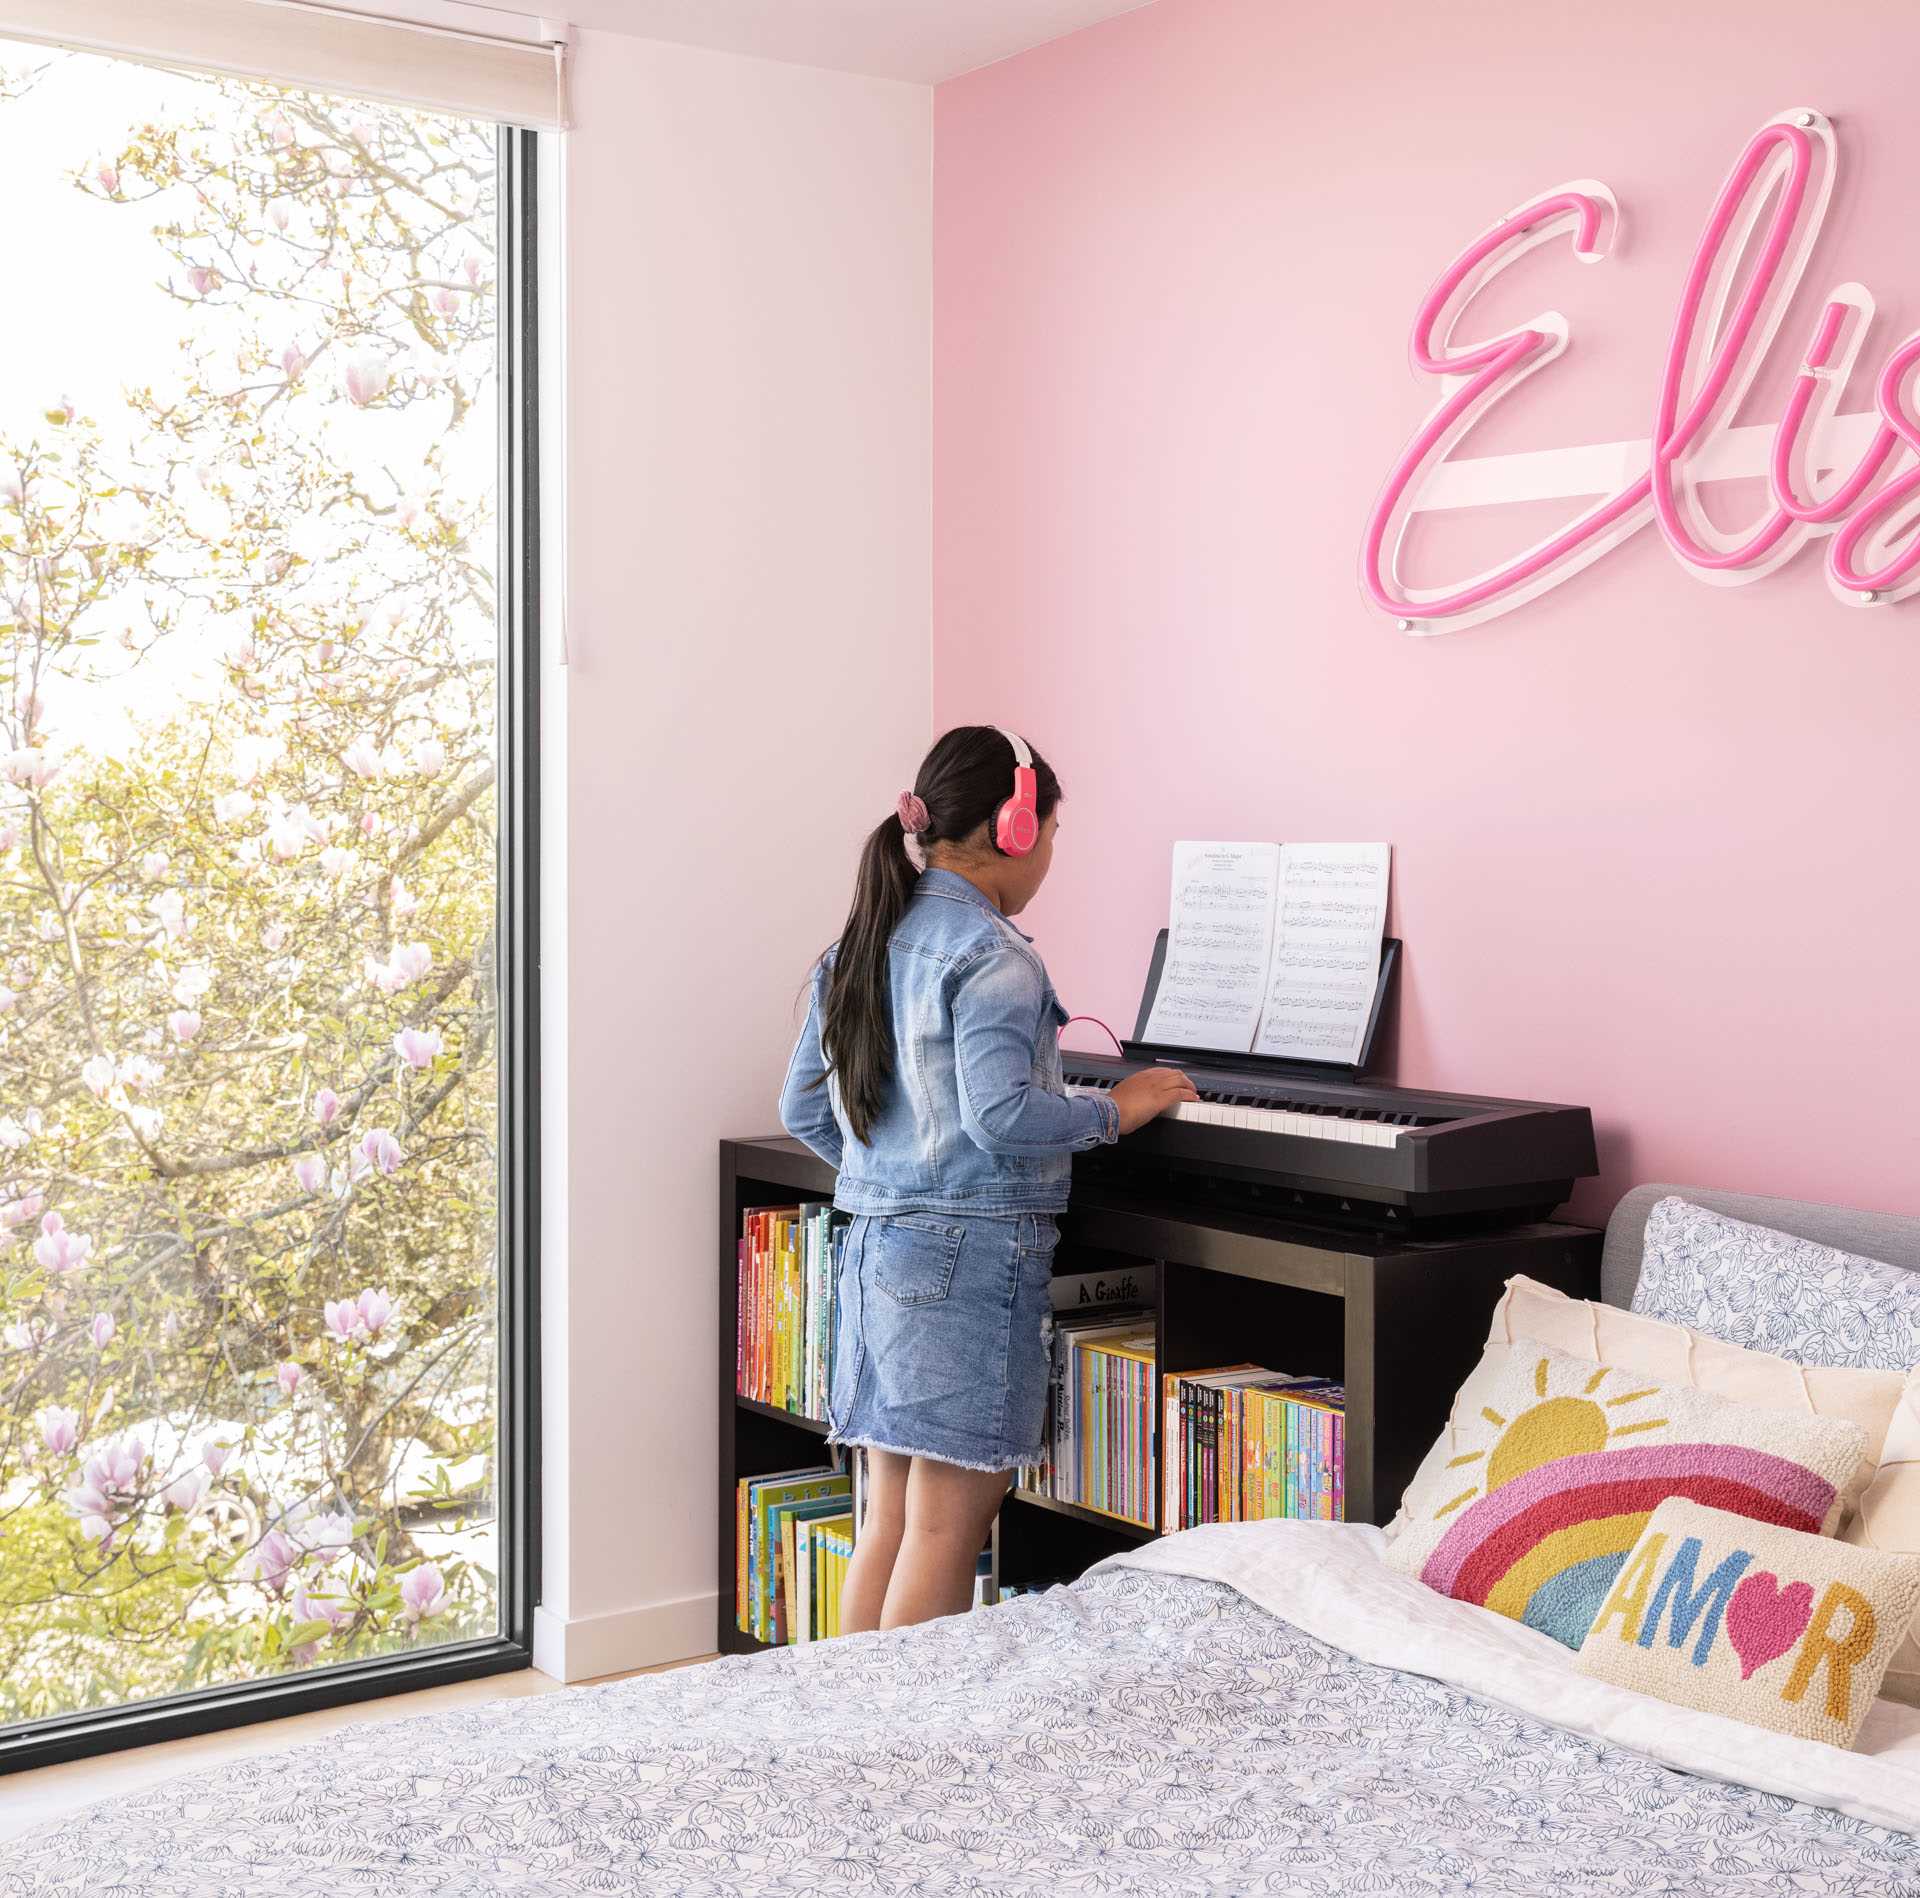 In a kid's bedroom, a pink accent wall with a neon sign creates a fun and colorful environment.